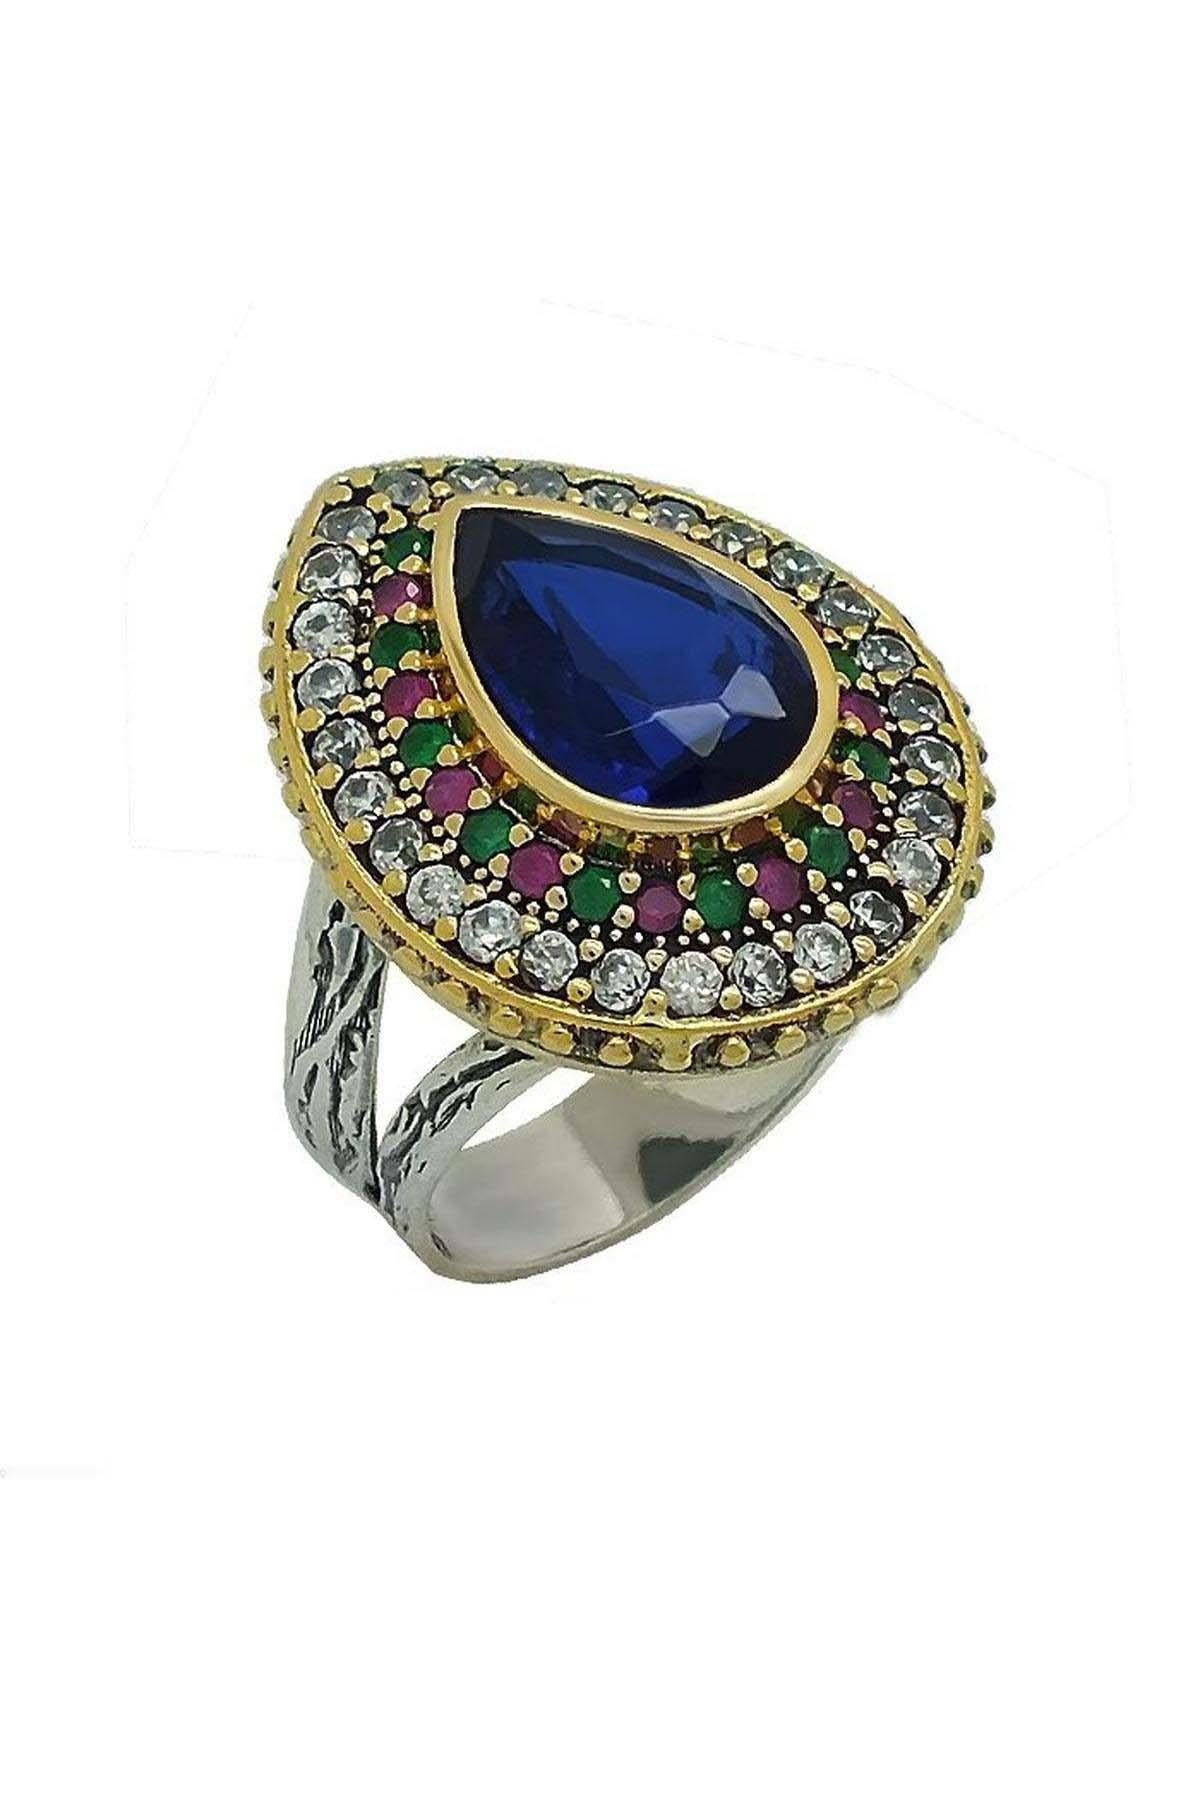 Sapphire Stone Silver Authentic Women's Ring Adjustable Hürrem Sultan Ring